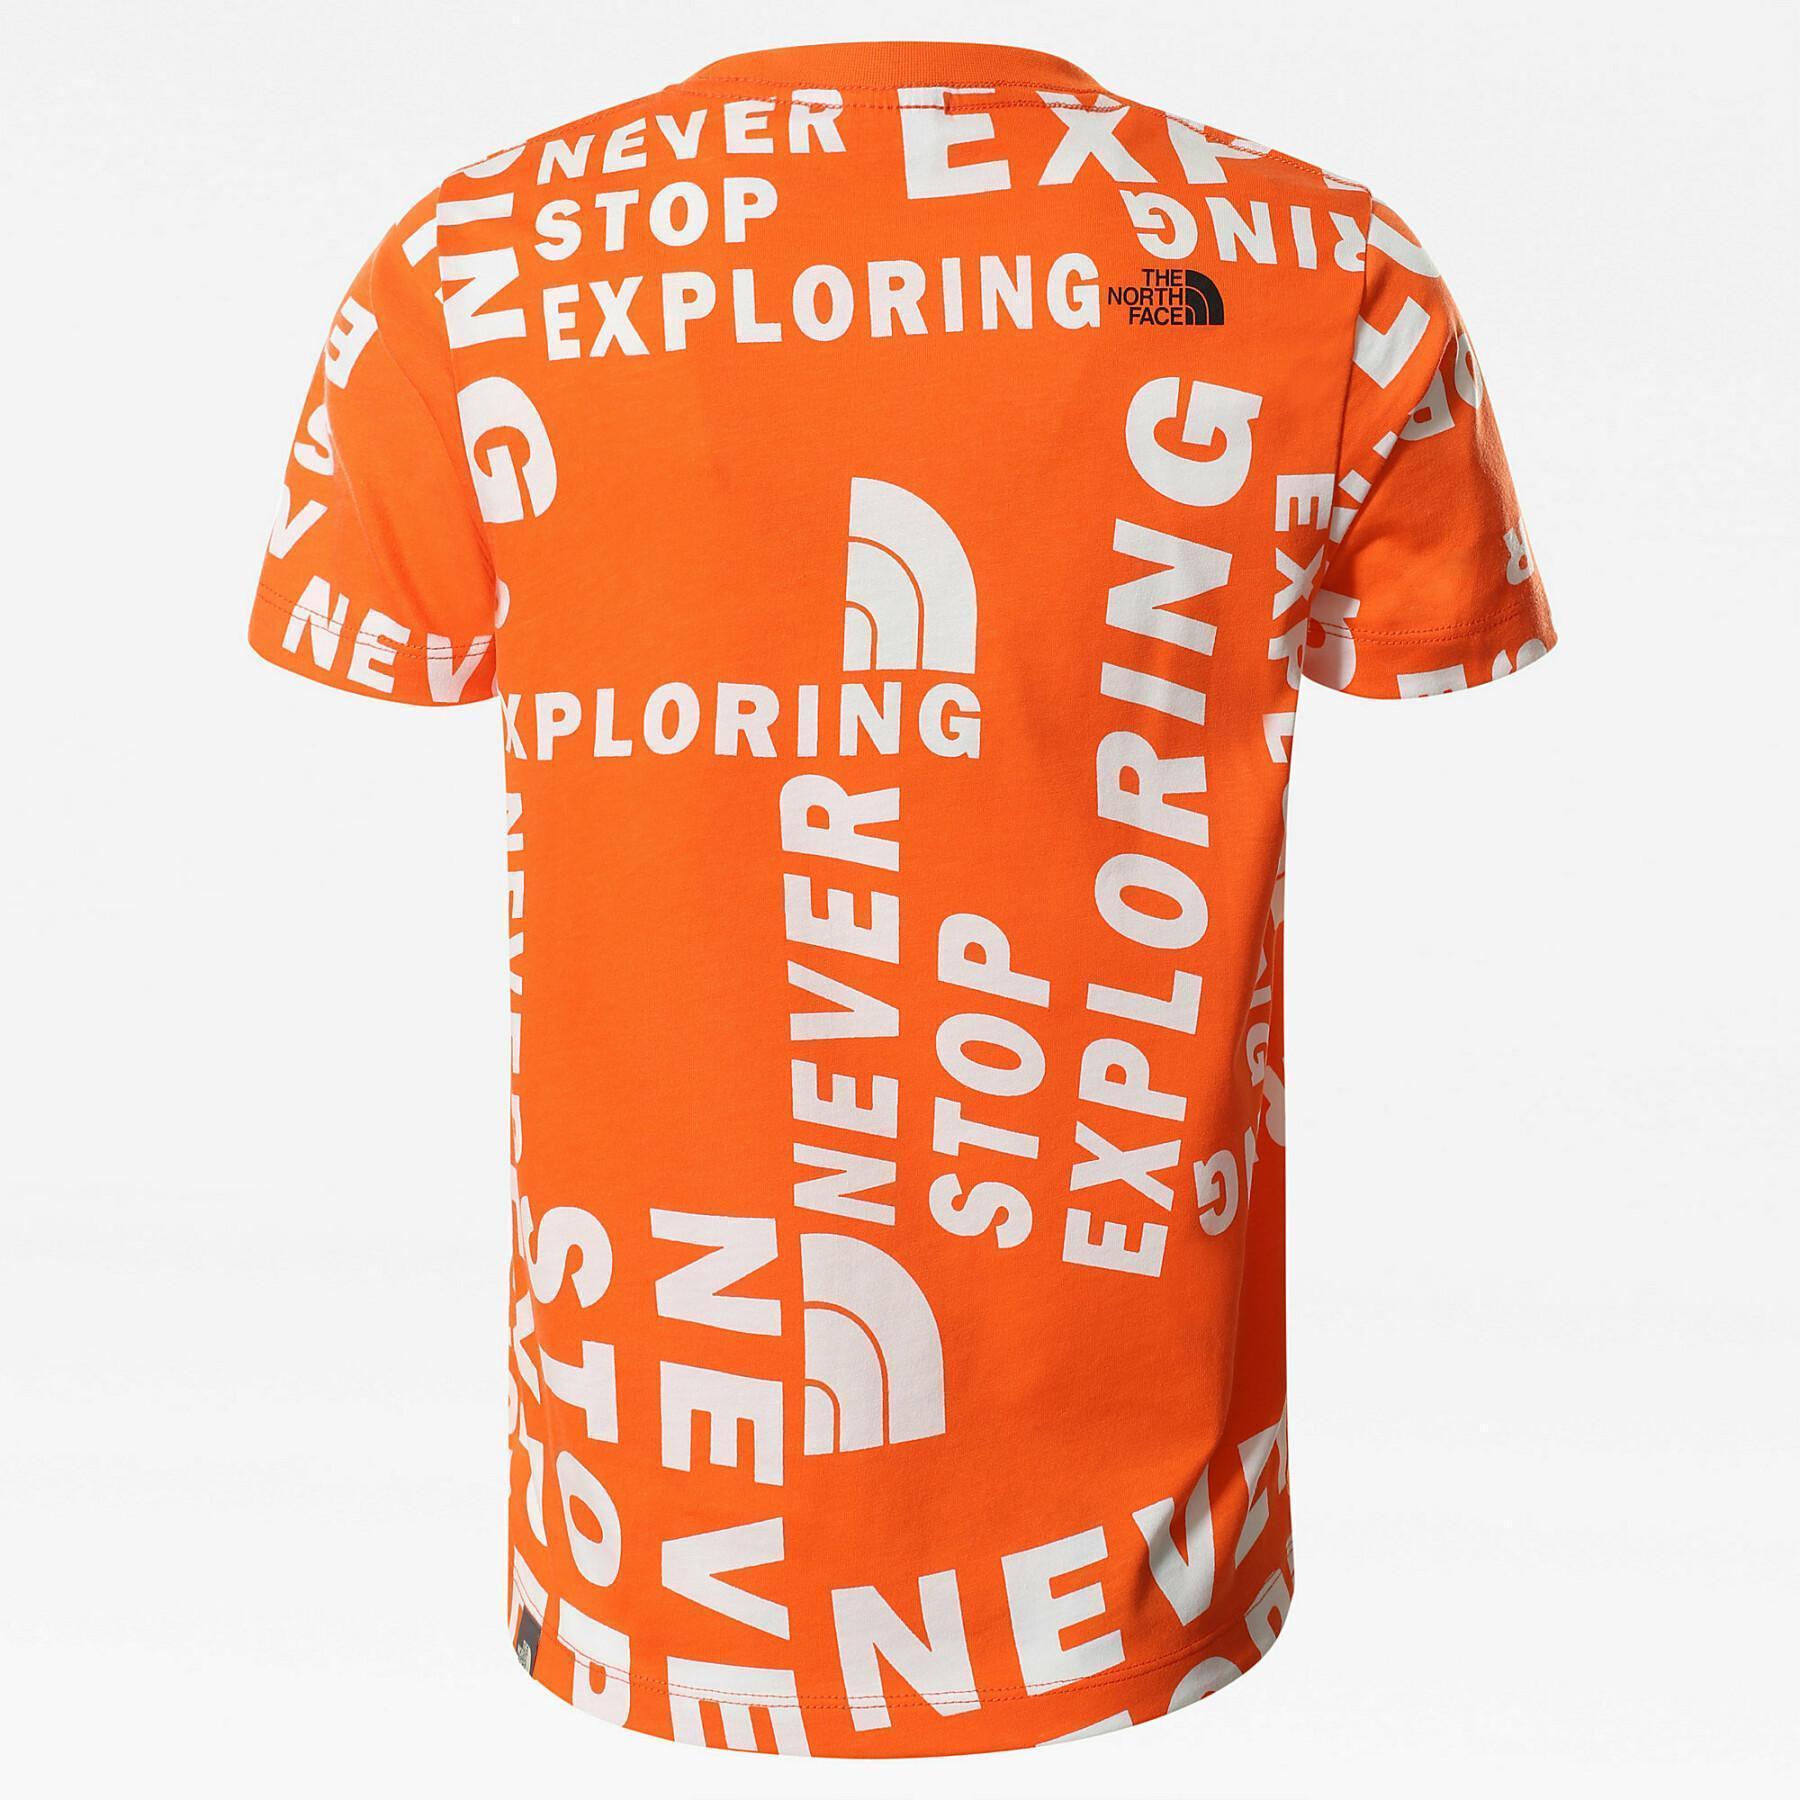 Child's T-shirt The North Face Simple Dome